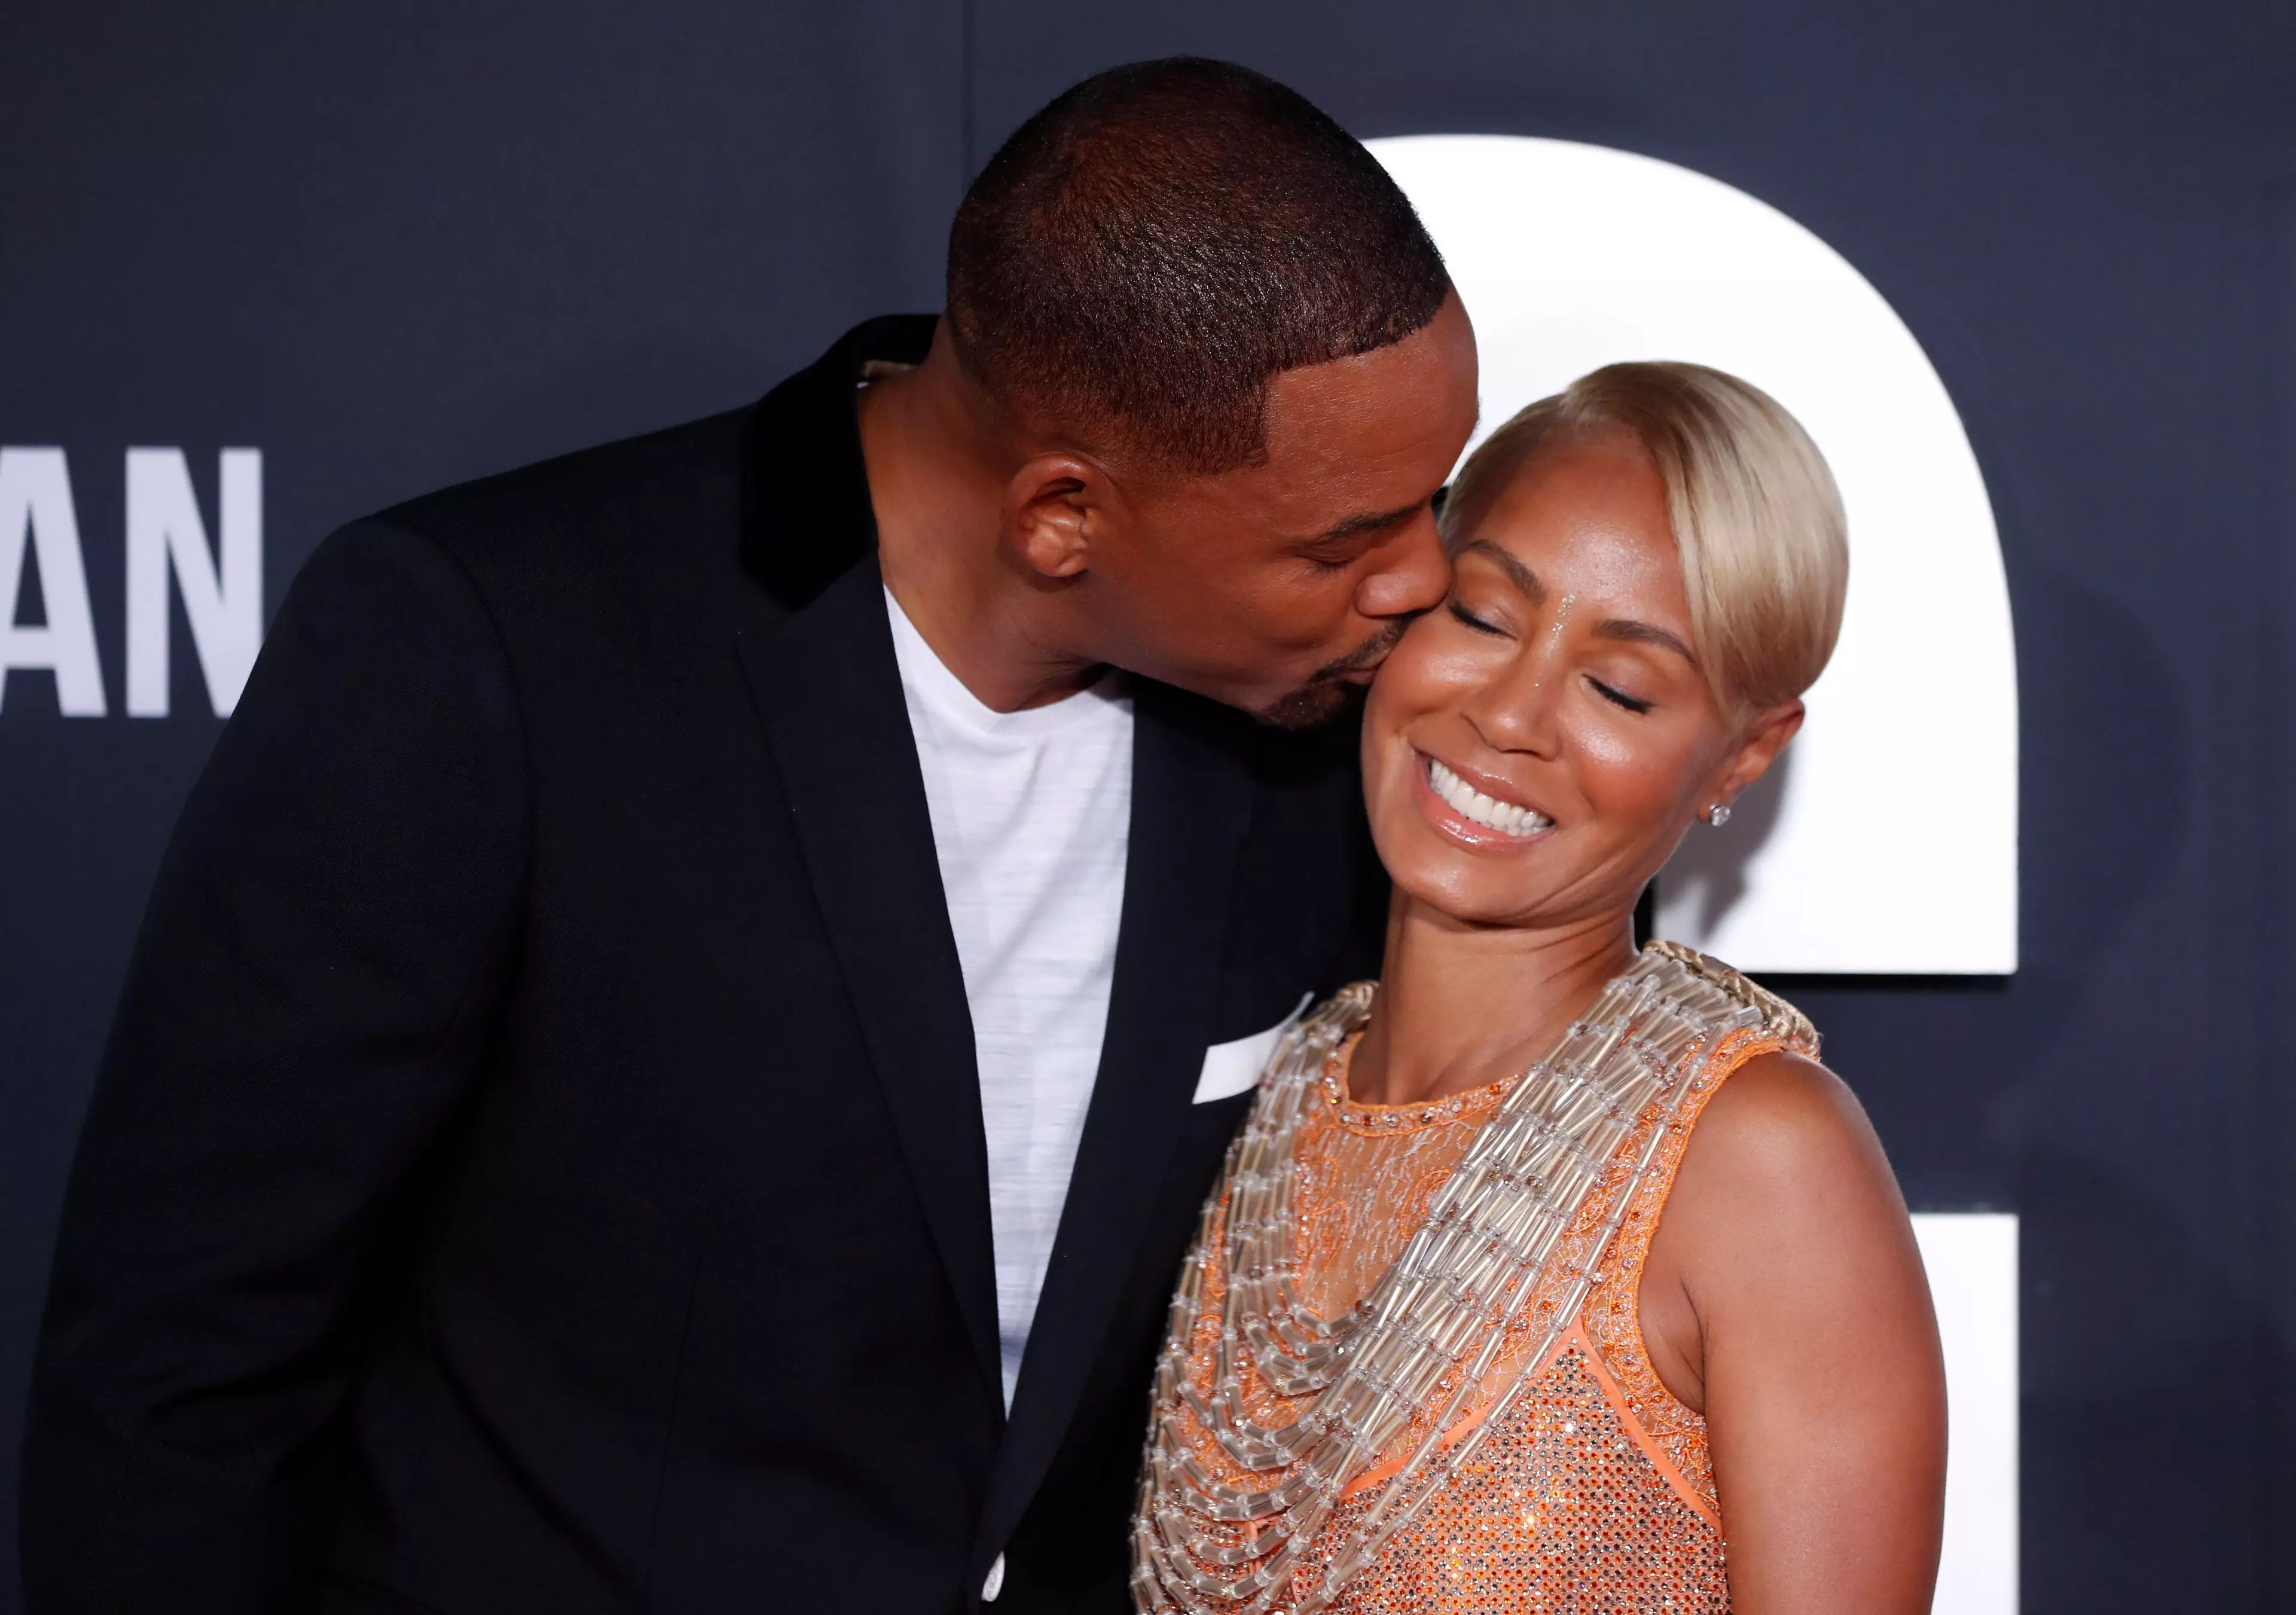 Jada Pinkett Smith recently opened up about her sex life with Will.